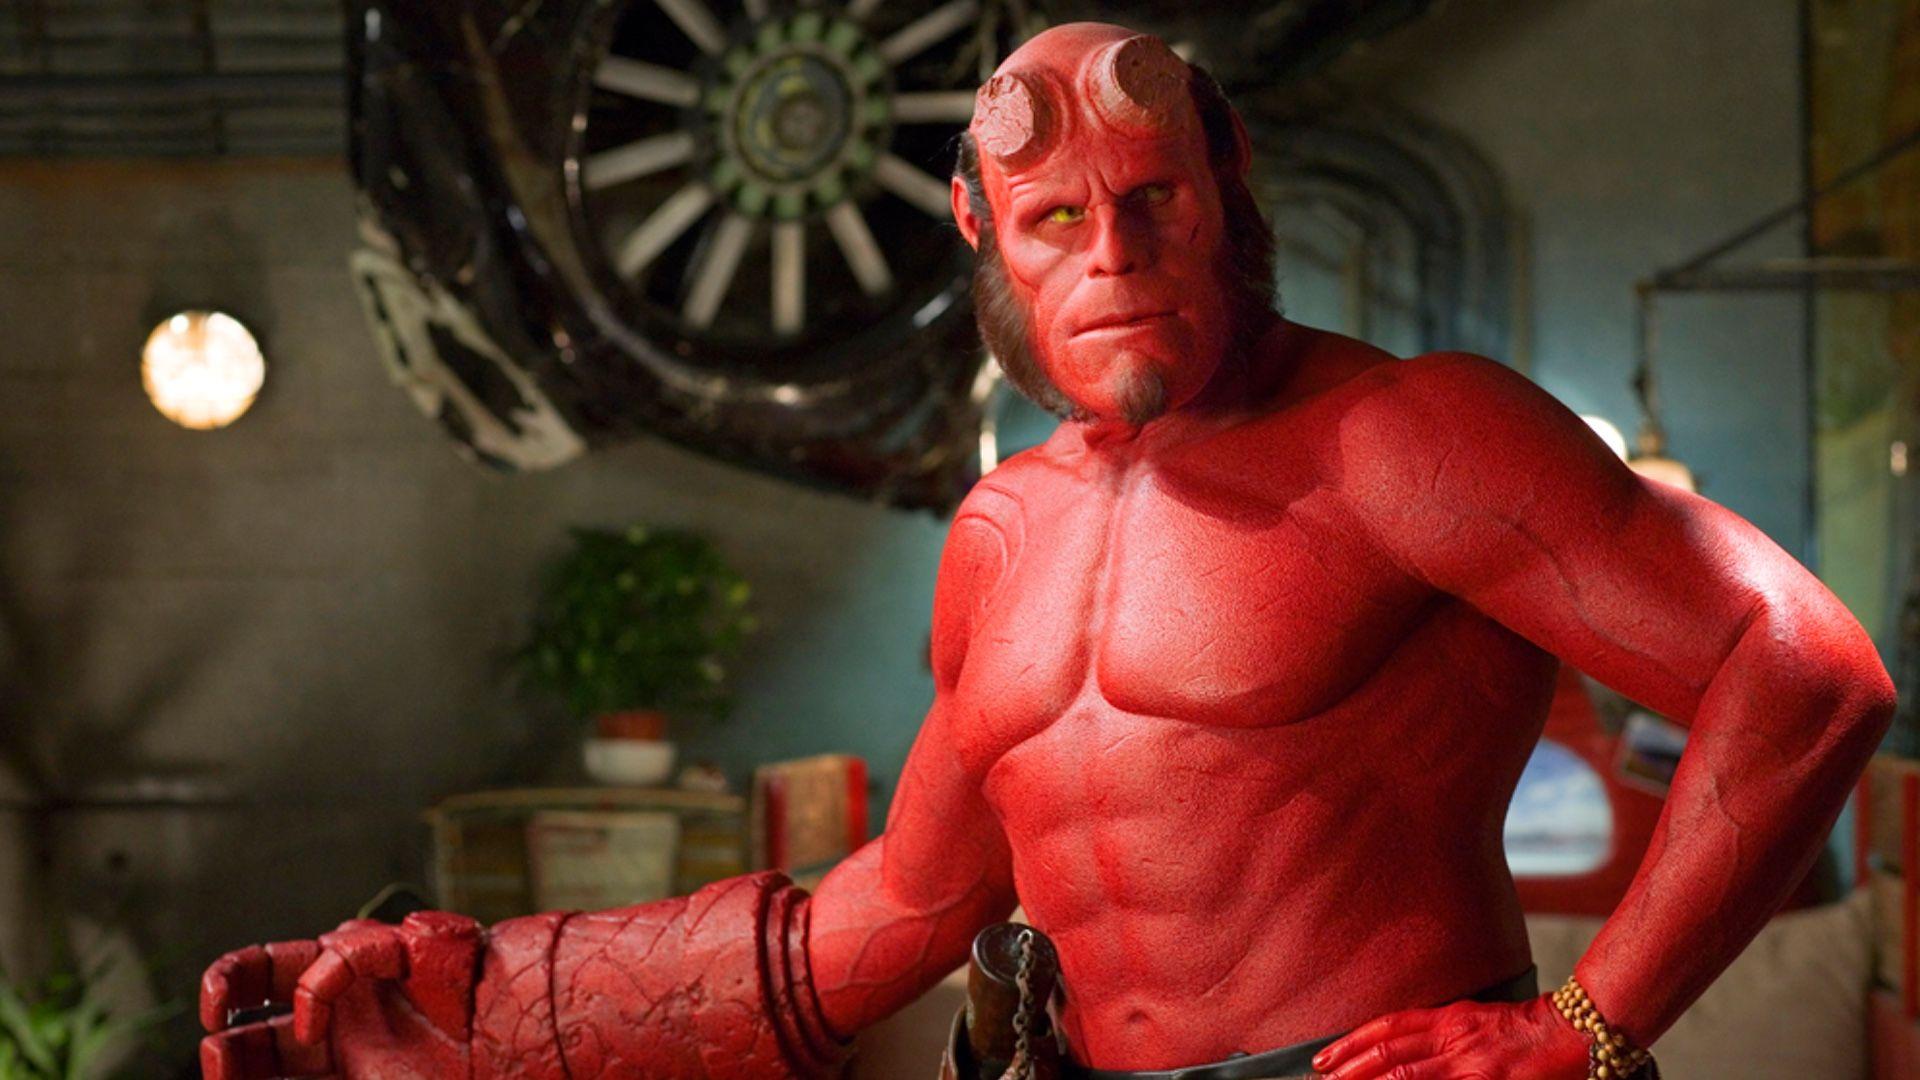 This New Poster For Neil Marshall's Hellboy Is Seriously Incredible